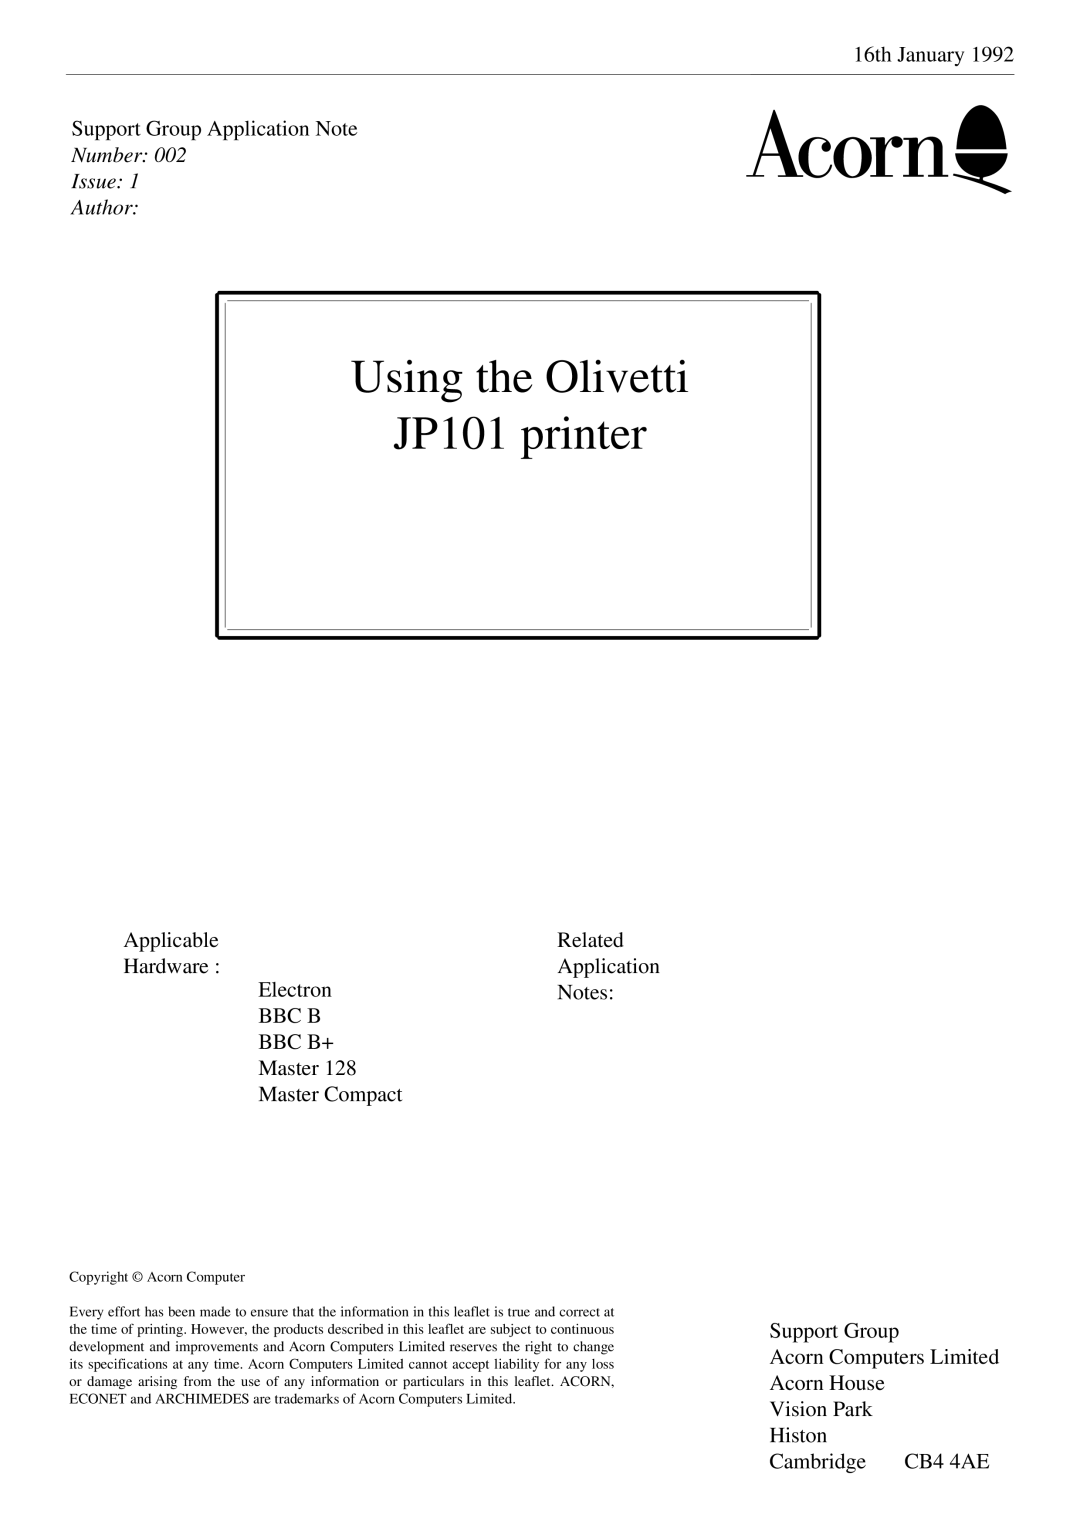 Olivetti specifications Using the Olivetti JP101 printer, Number Issue Author 